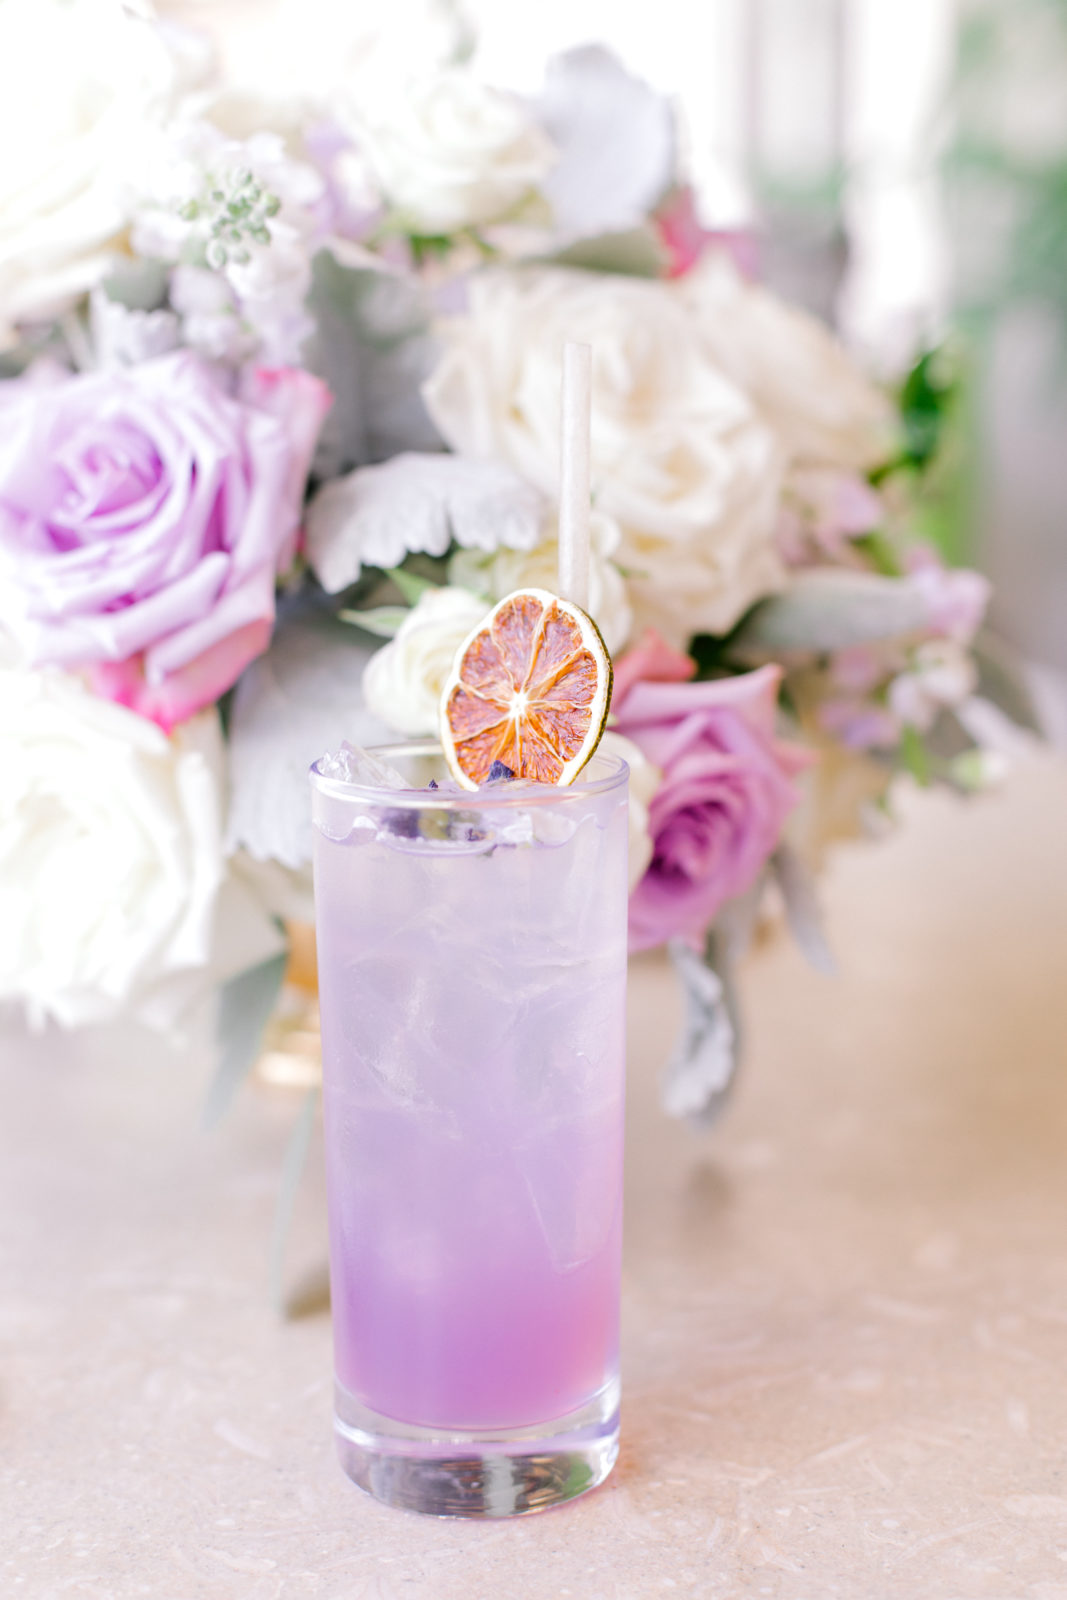 Game Day Blitz | The Perfect Purple Game Day Cocktail #gameday #perfect #cocktail #purple #refreshing #Texas #Christian #University #spirited  Game Day Blitz Cocktail